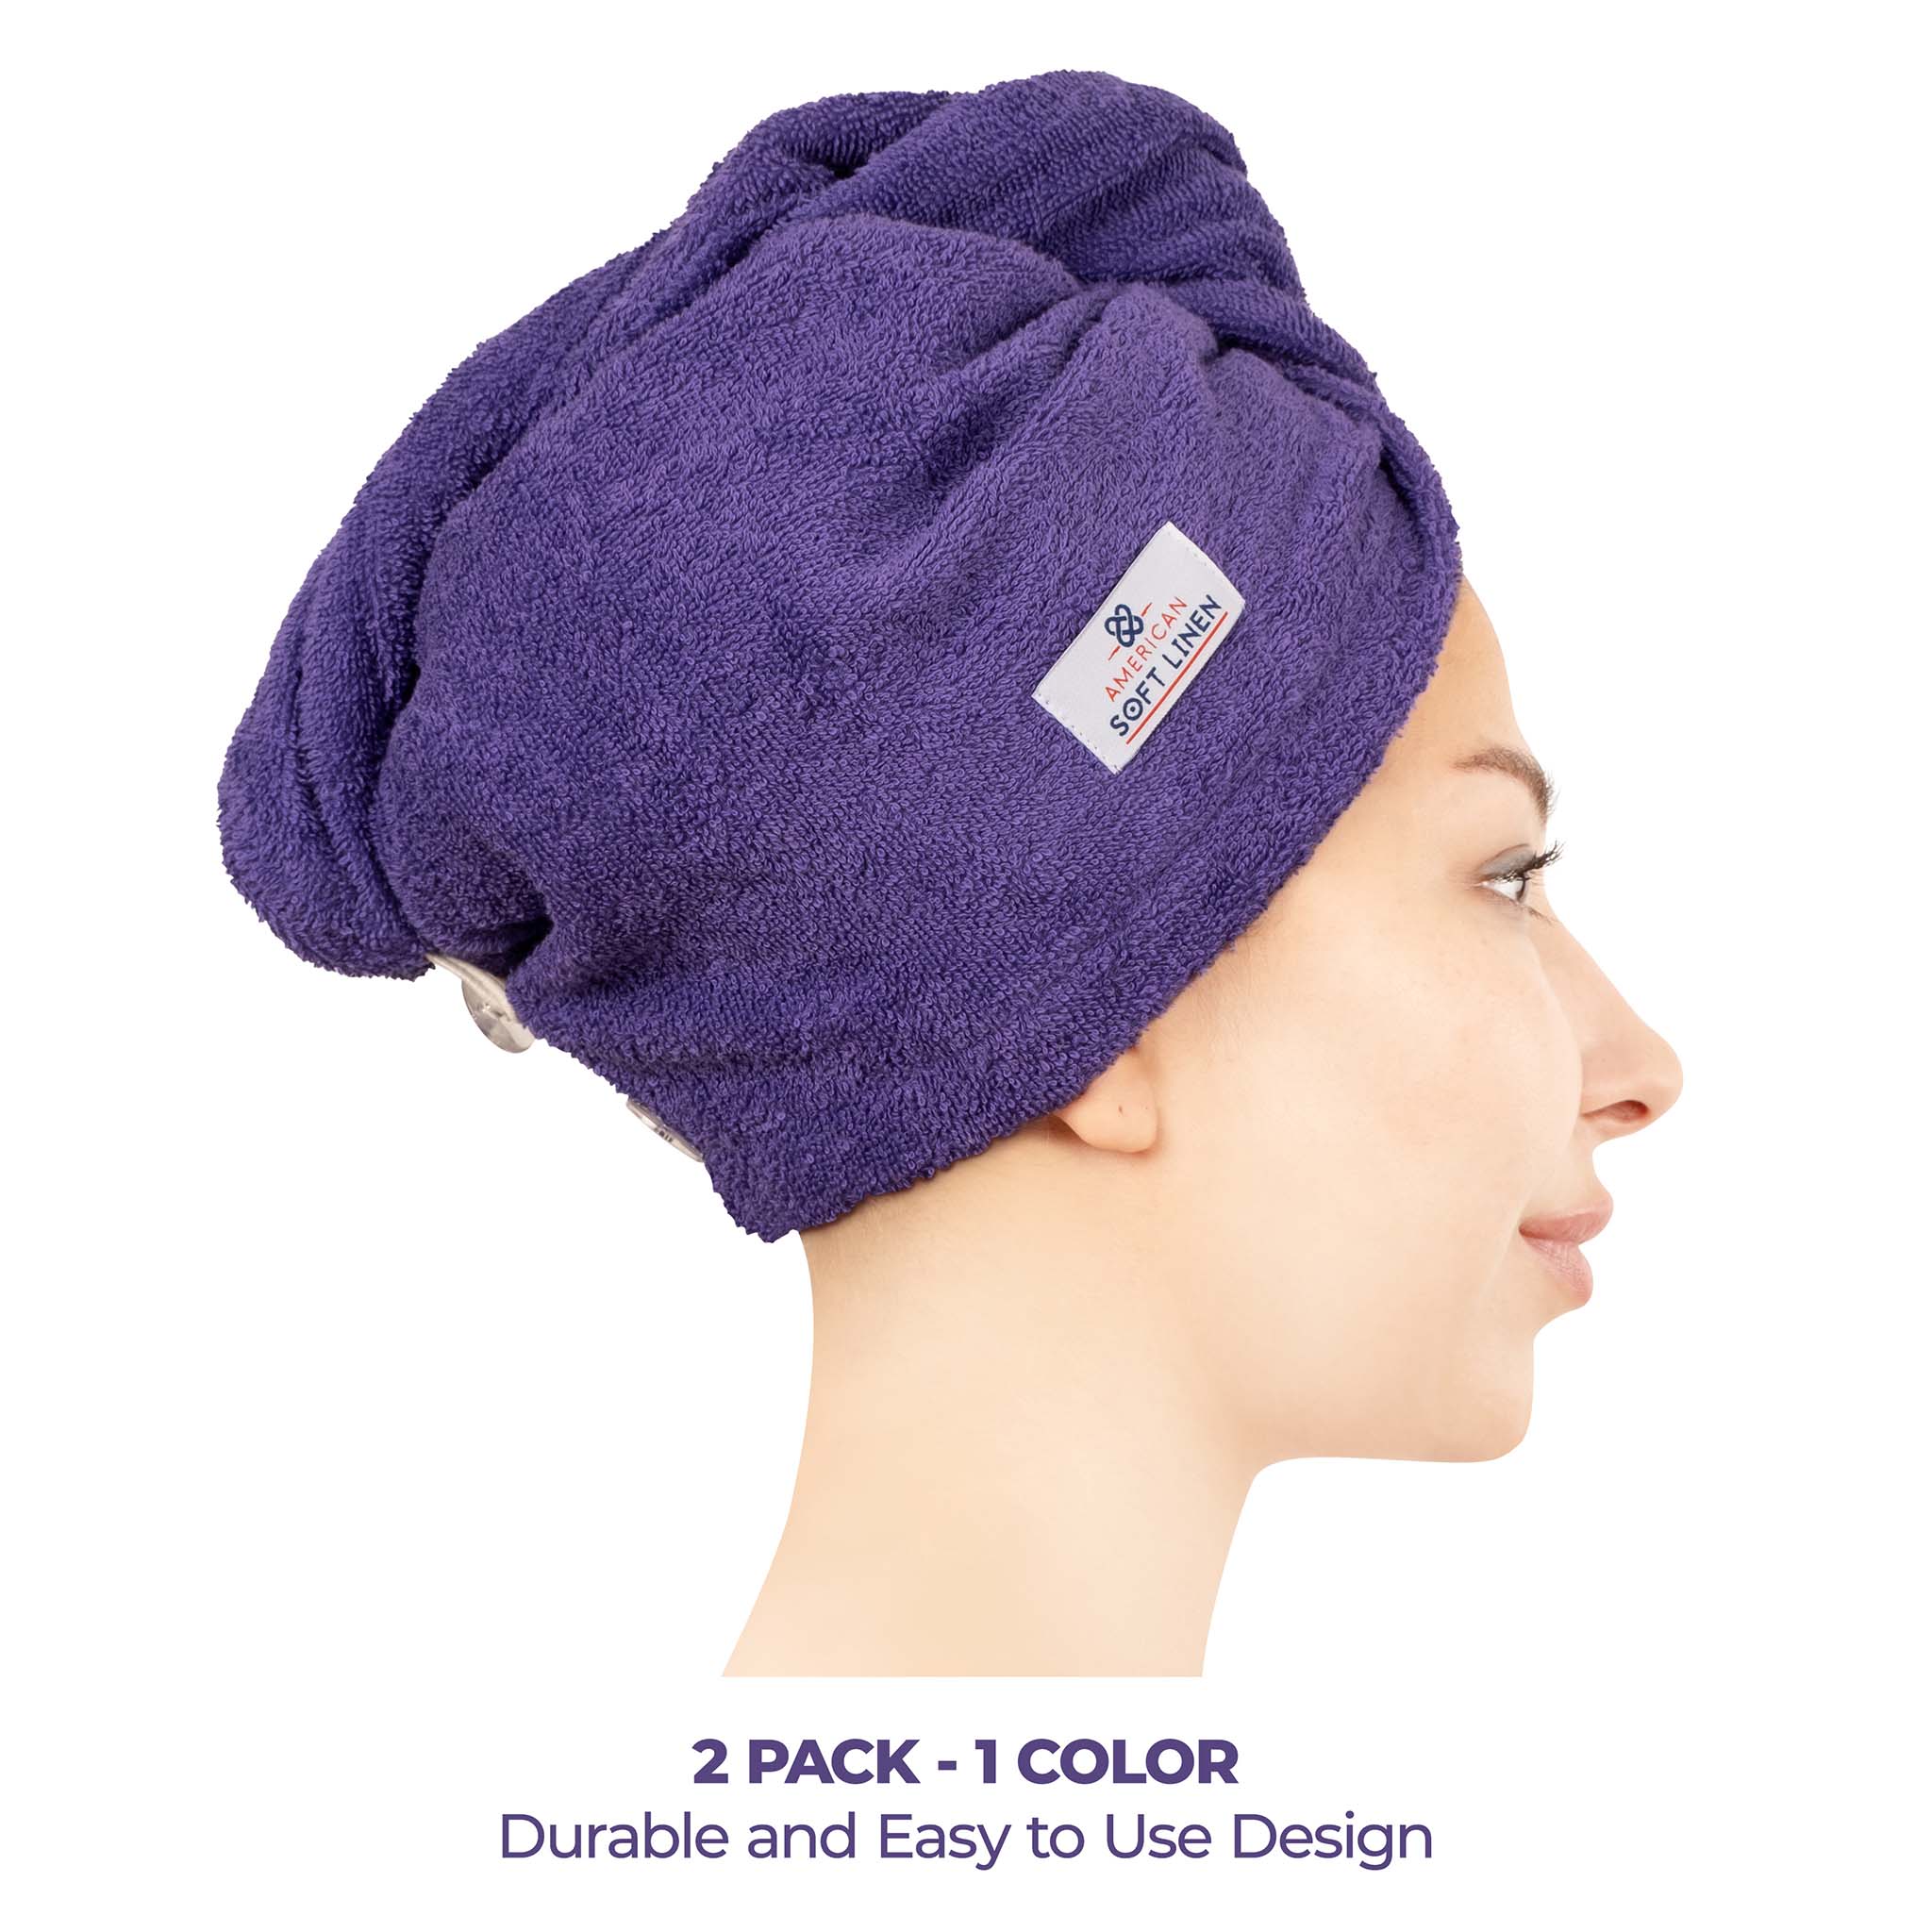 American Soft Linen 100% Cotton Hair Drying Towels for Women Purple-2